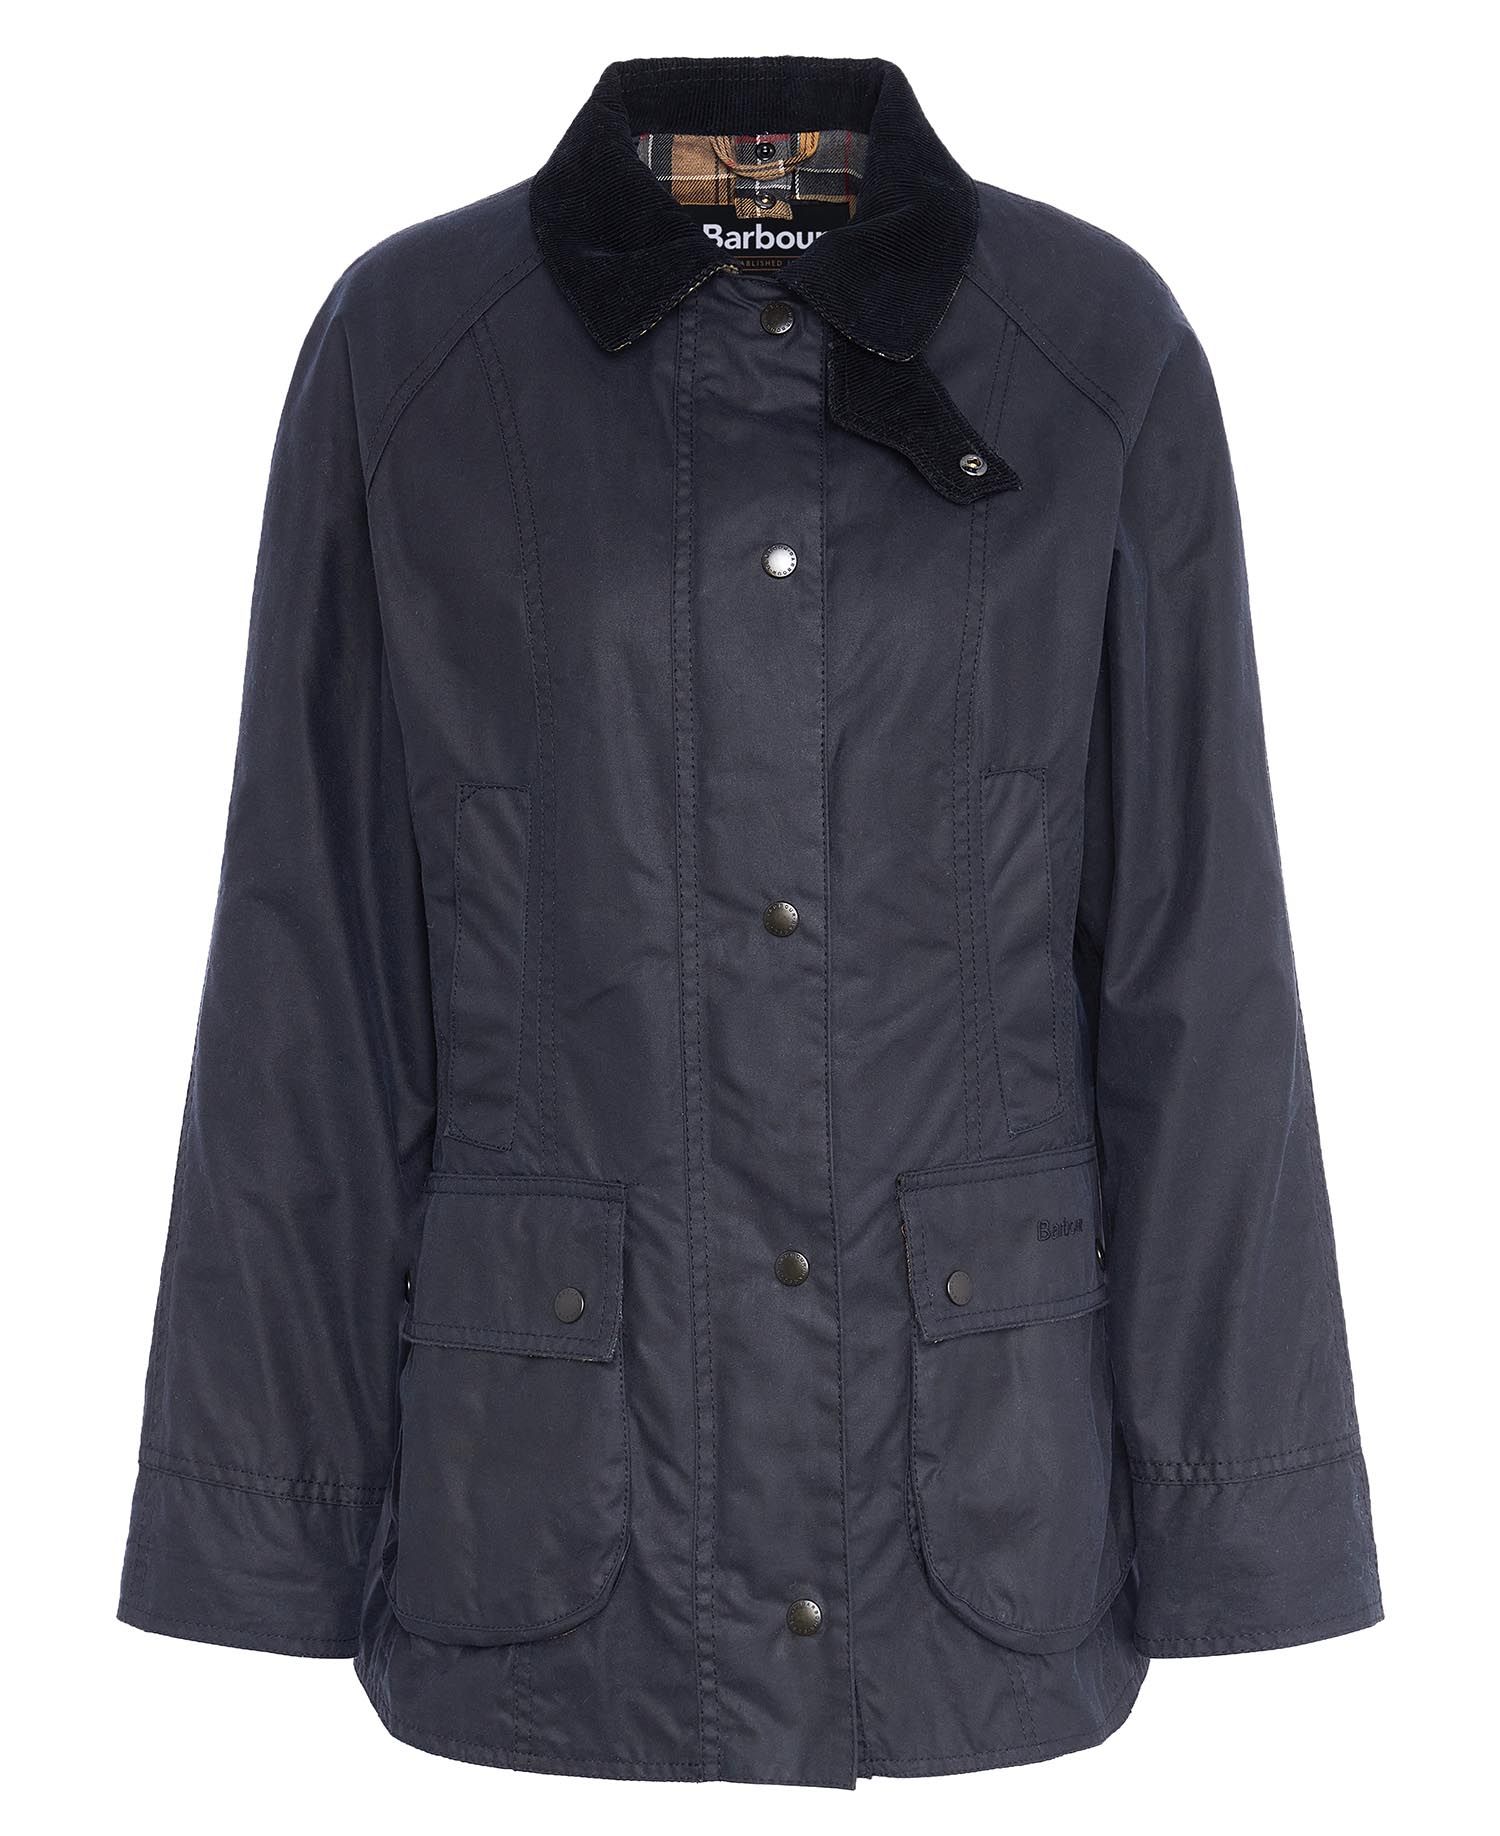 Barbour Beadnell Wax Jacket in Navy | Barbour